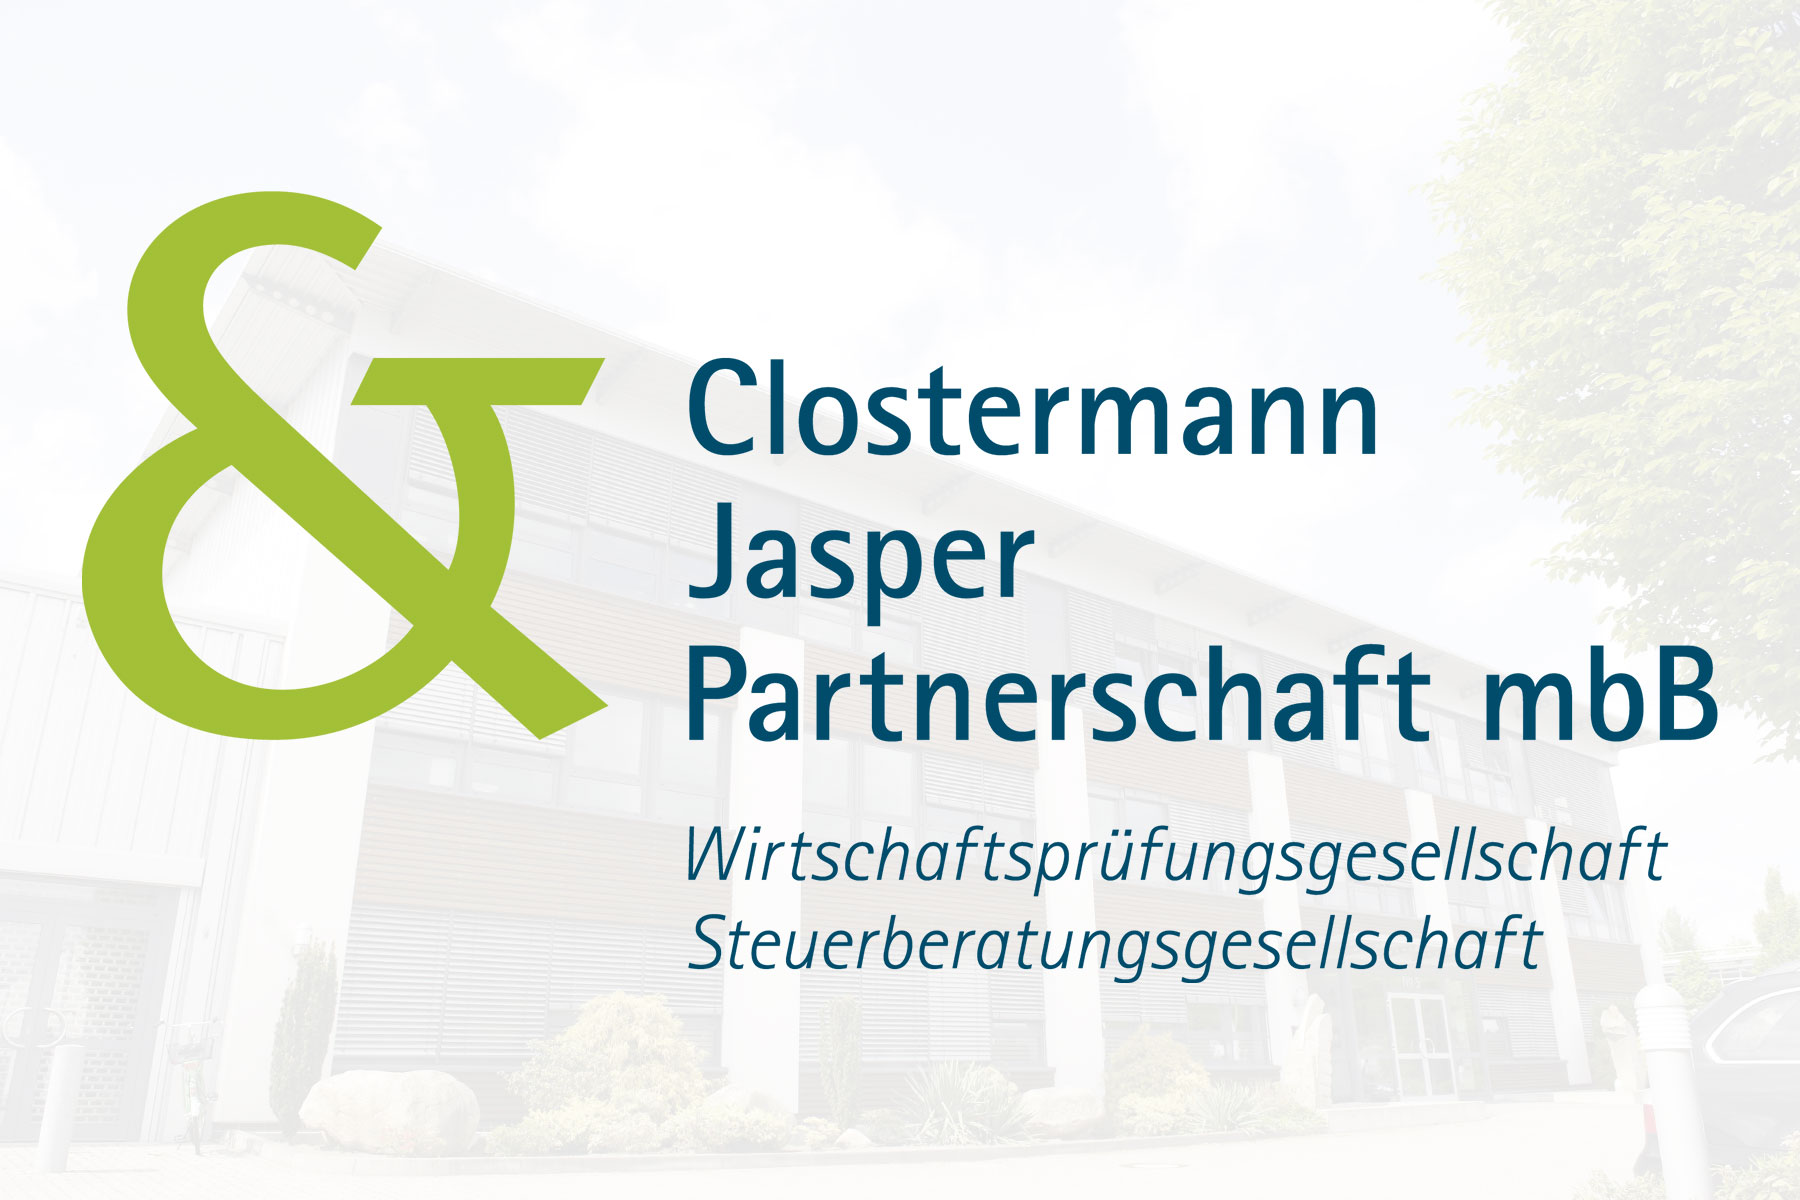 Clostermann & Jasper Redesign powered by AI Digital Consulting